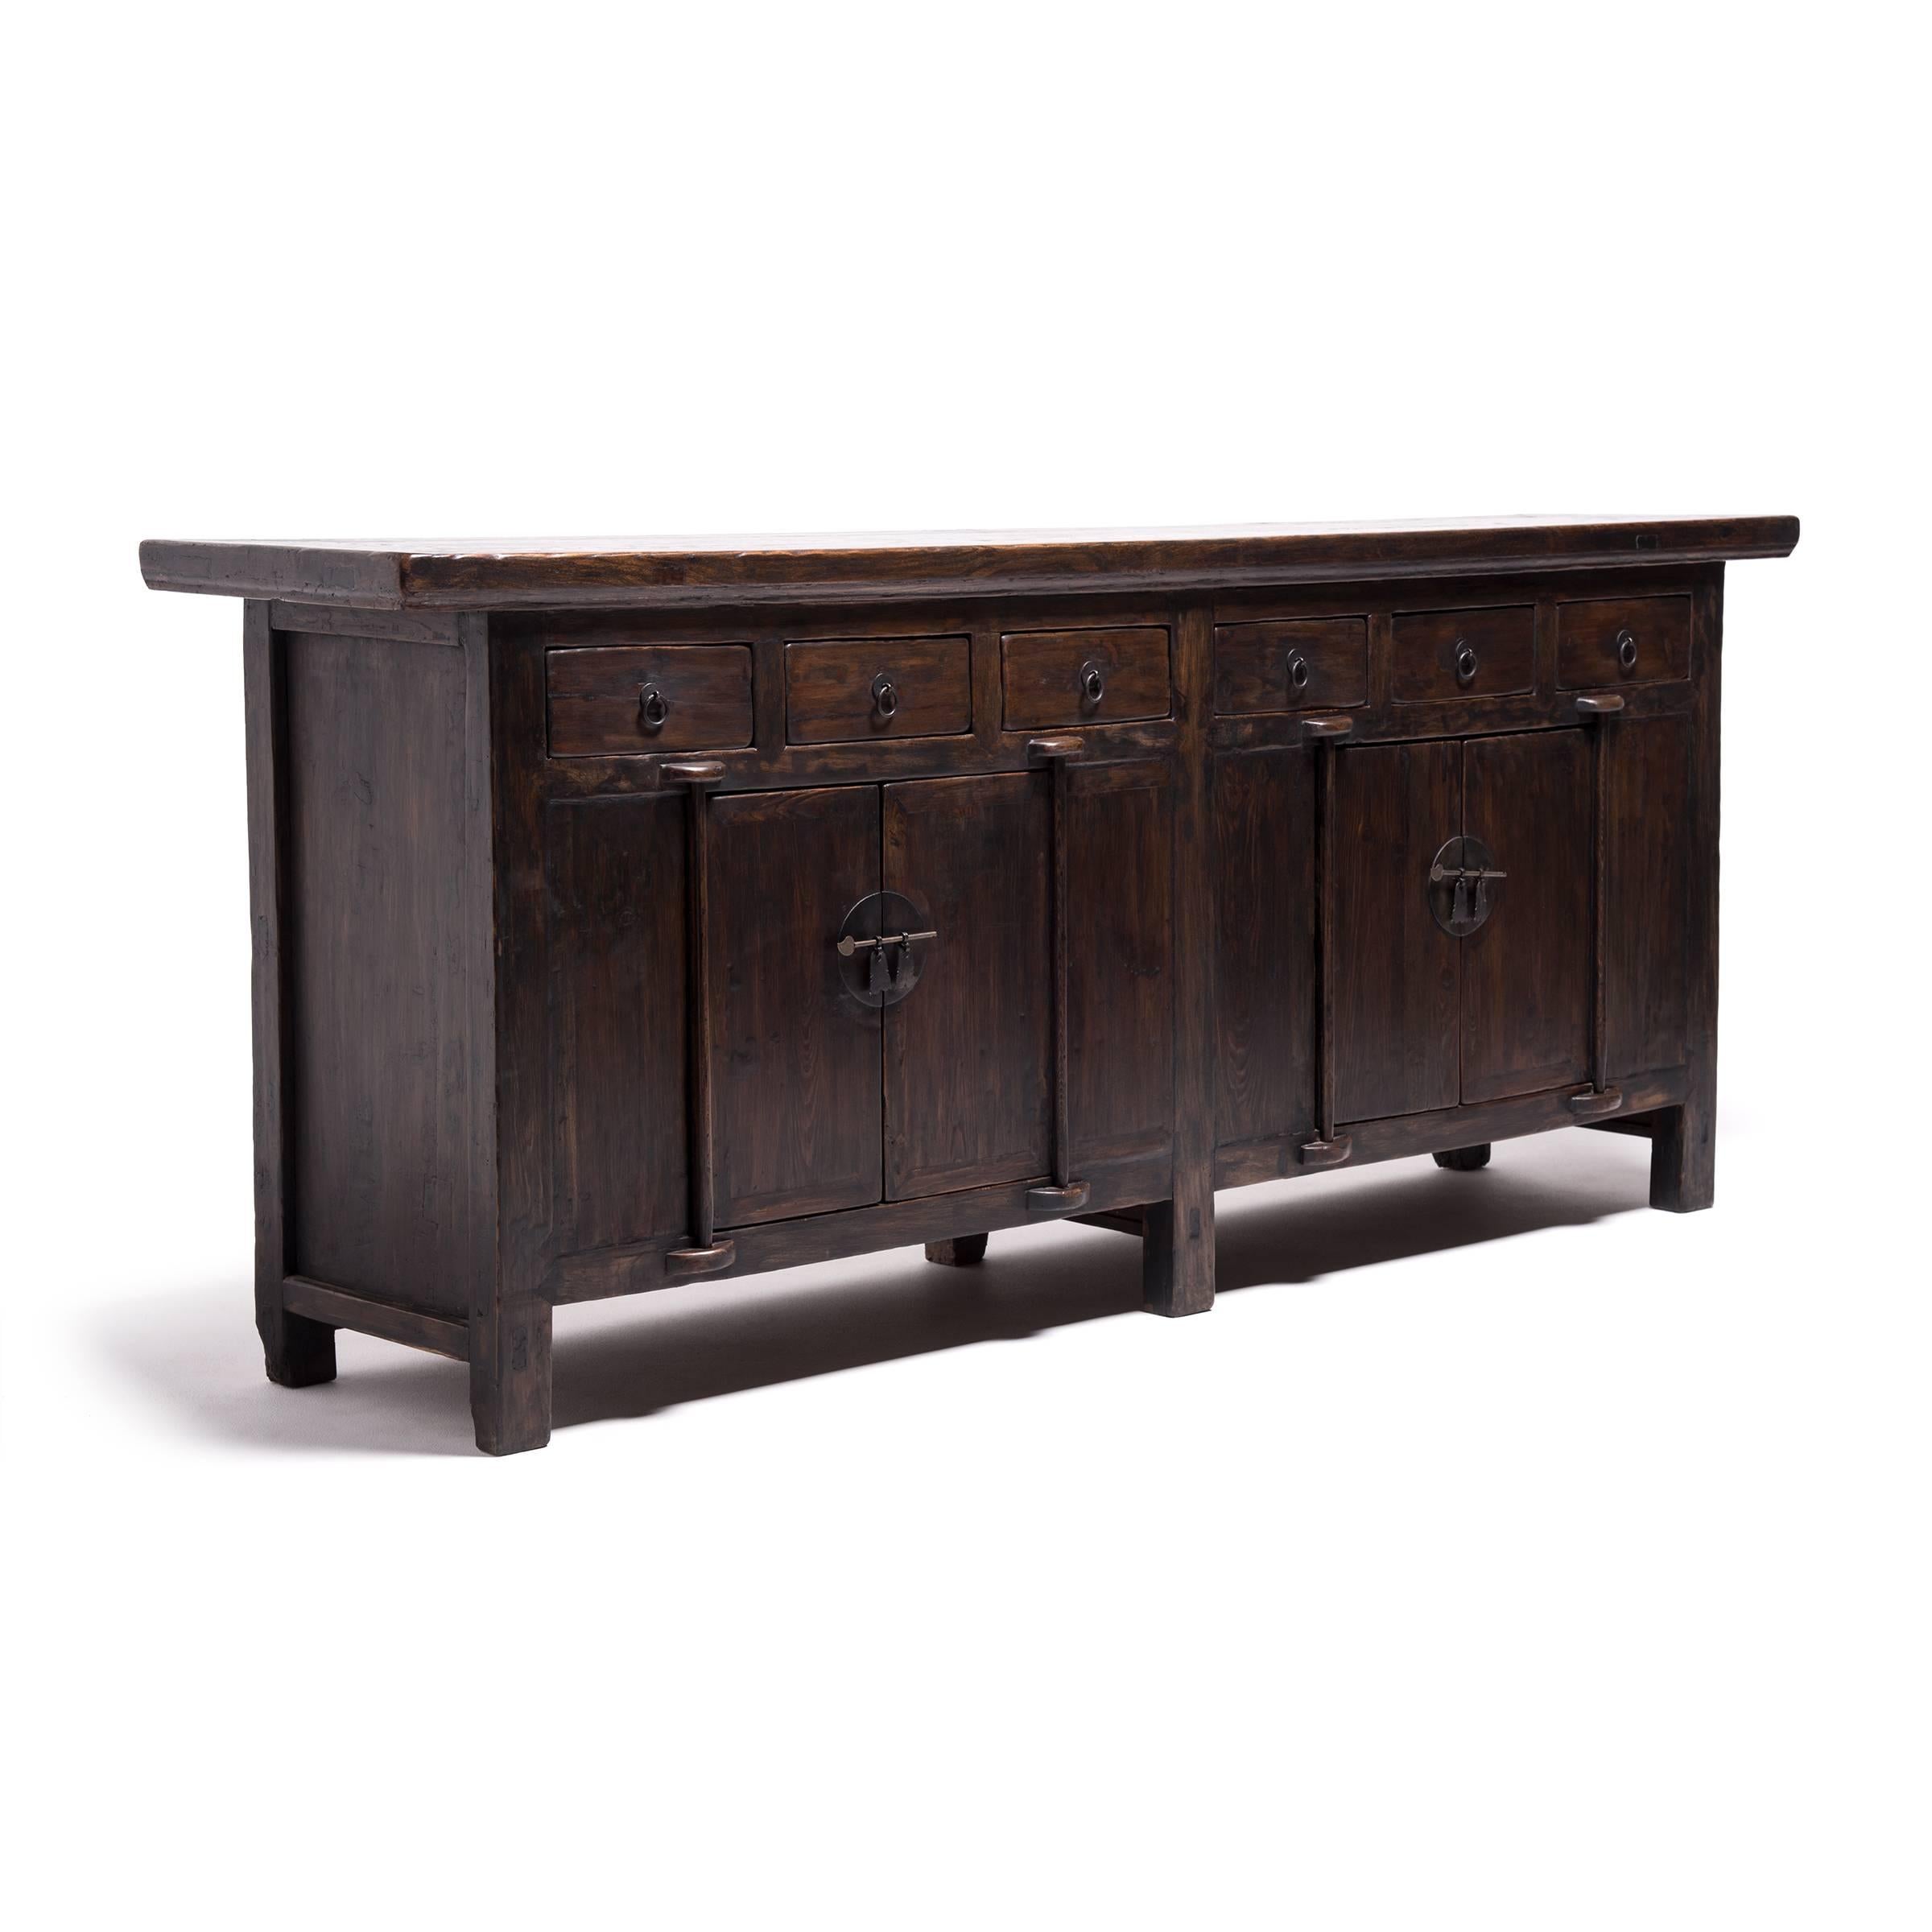 Constructed without screws or nails, this elegant coffee tops two cabinets with a row of four small drawers, appointed with ring pulls and decorative latches with dagger posts. Dating from circa 1815 during the latter half of the Qing dynasty, the